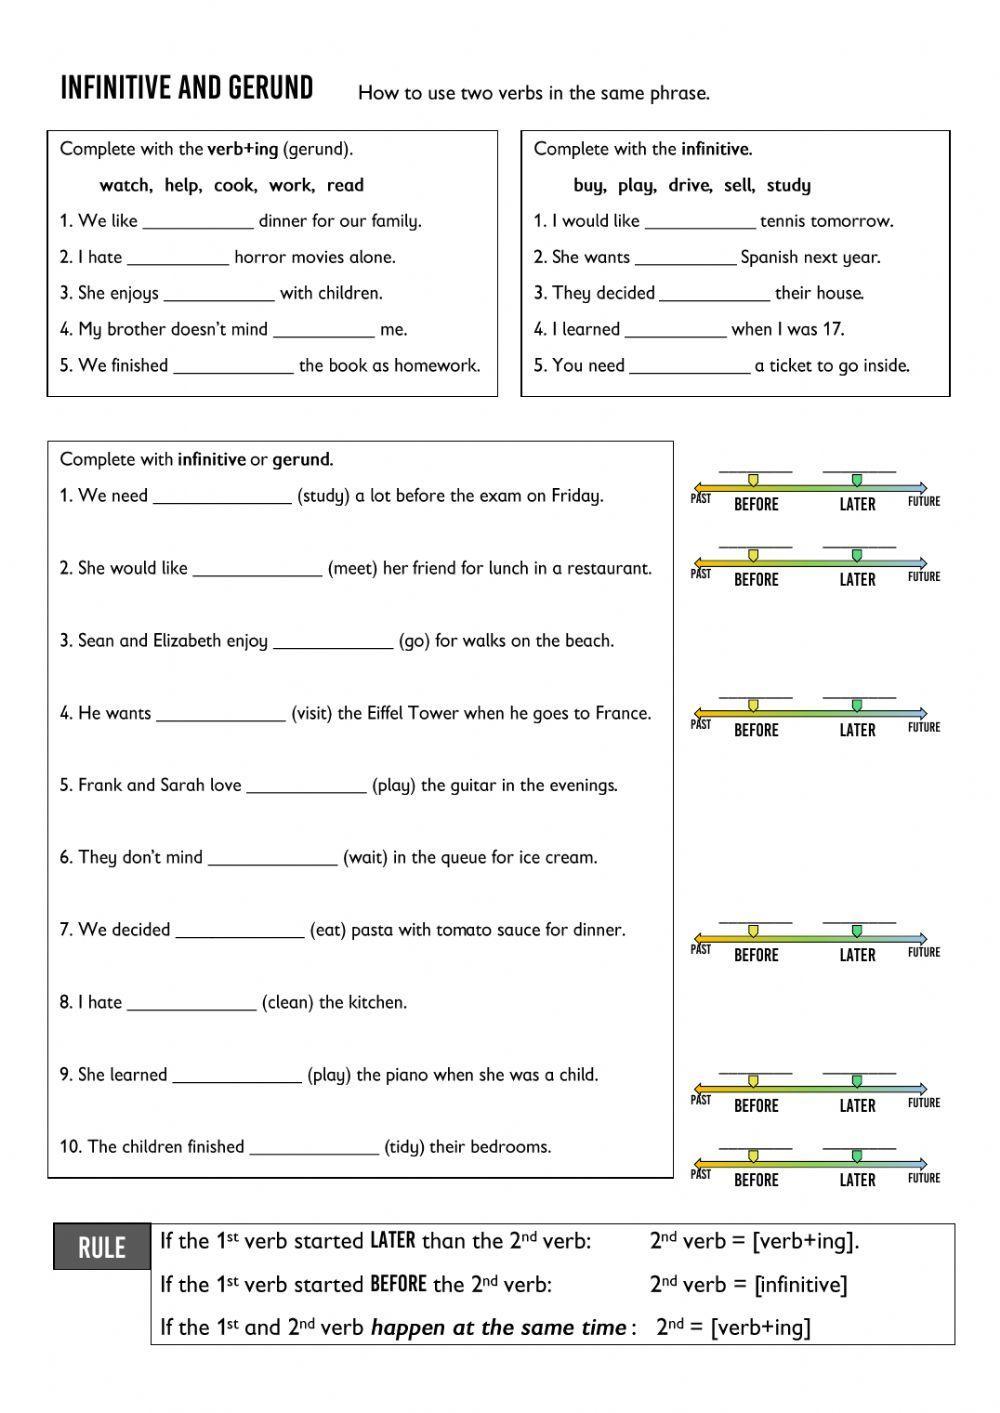 Using two or more verbs in a phrase - infinitive and gerund verbs KET(C)